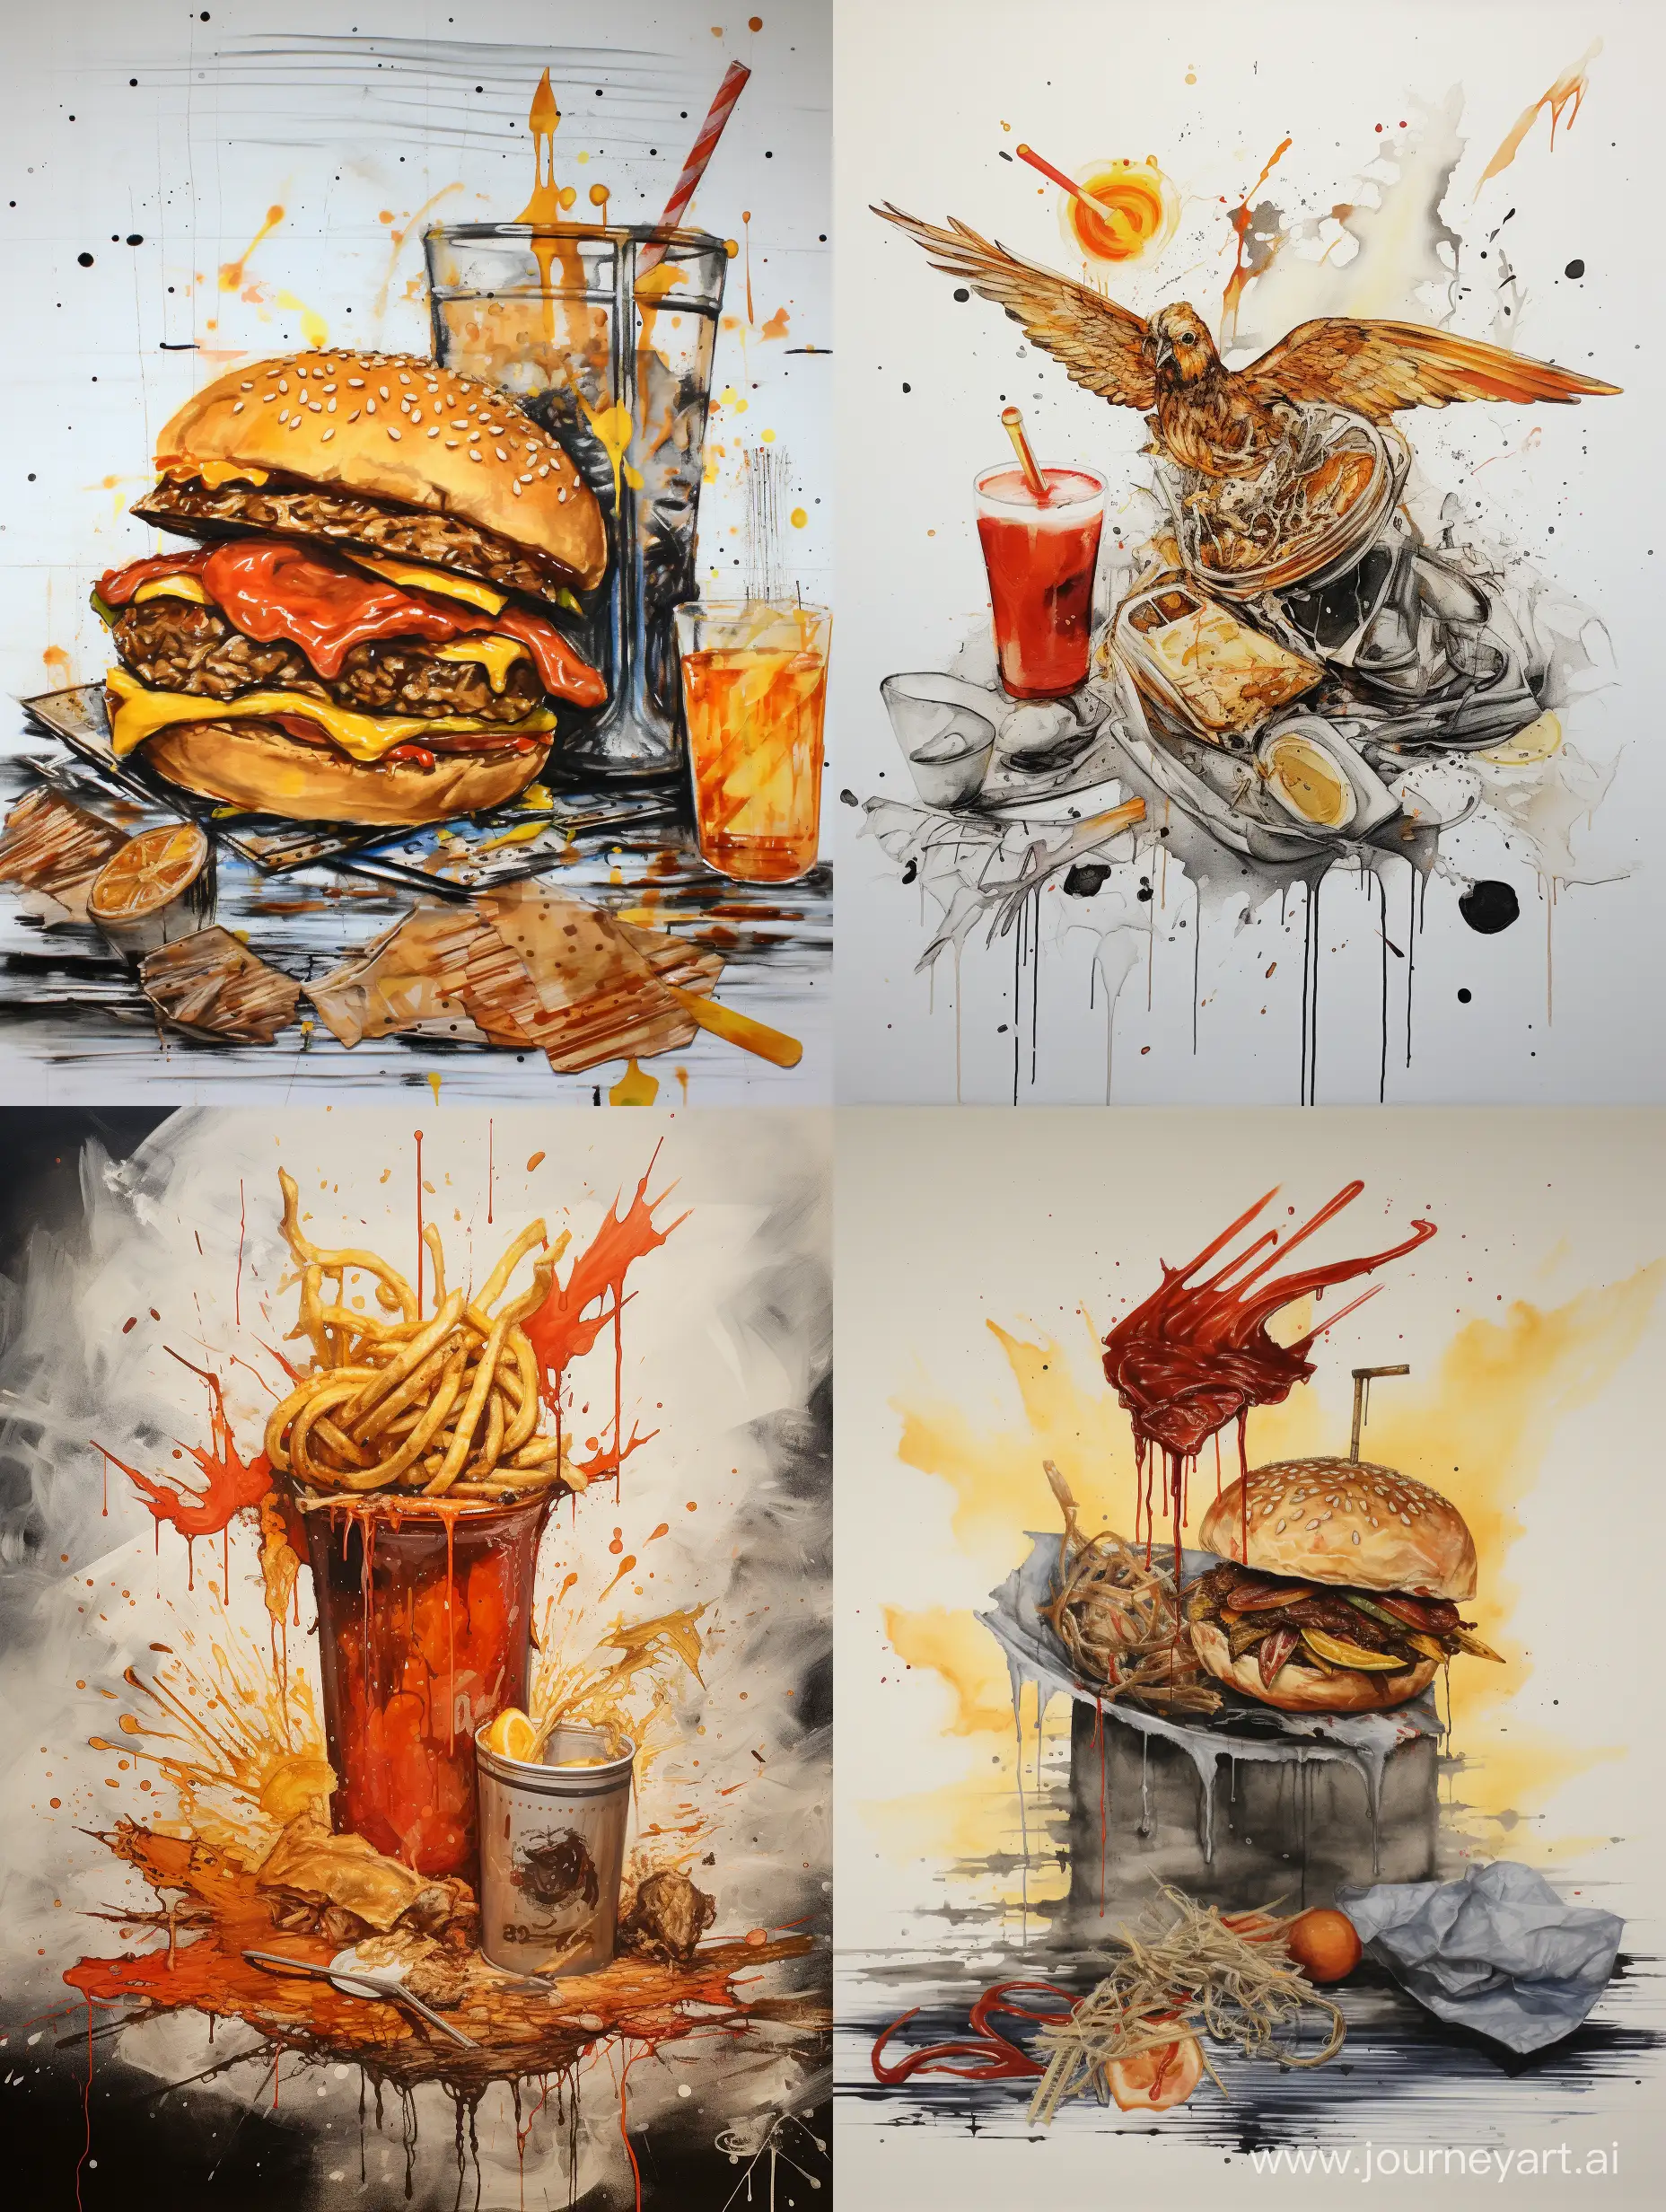 Chaotic-Diner-Scene-HalfEaten-Burger-Whiskey-Manuscript-Pages-and-Fries